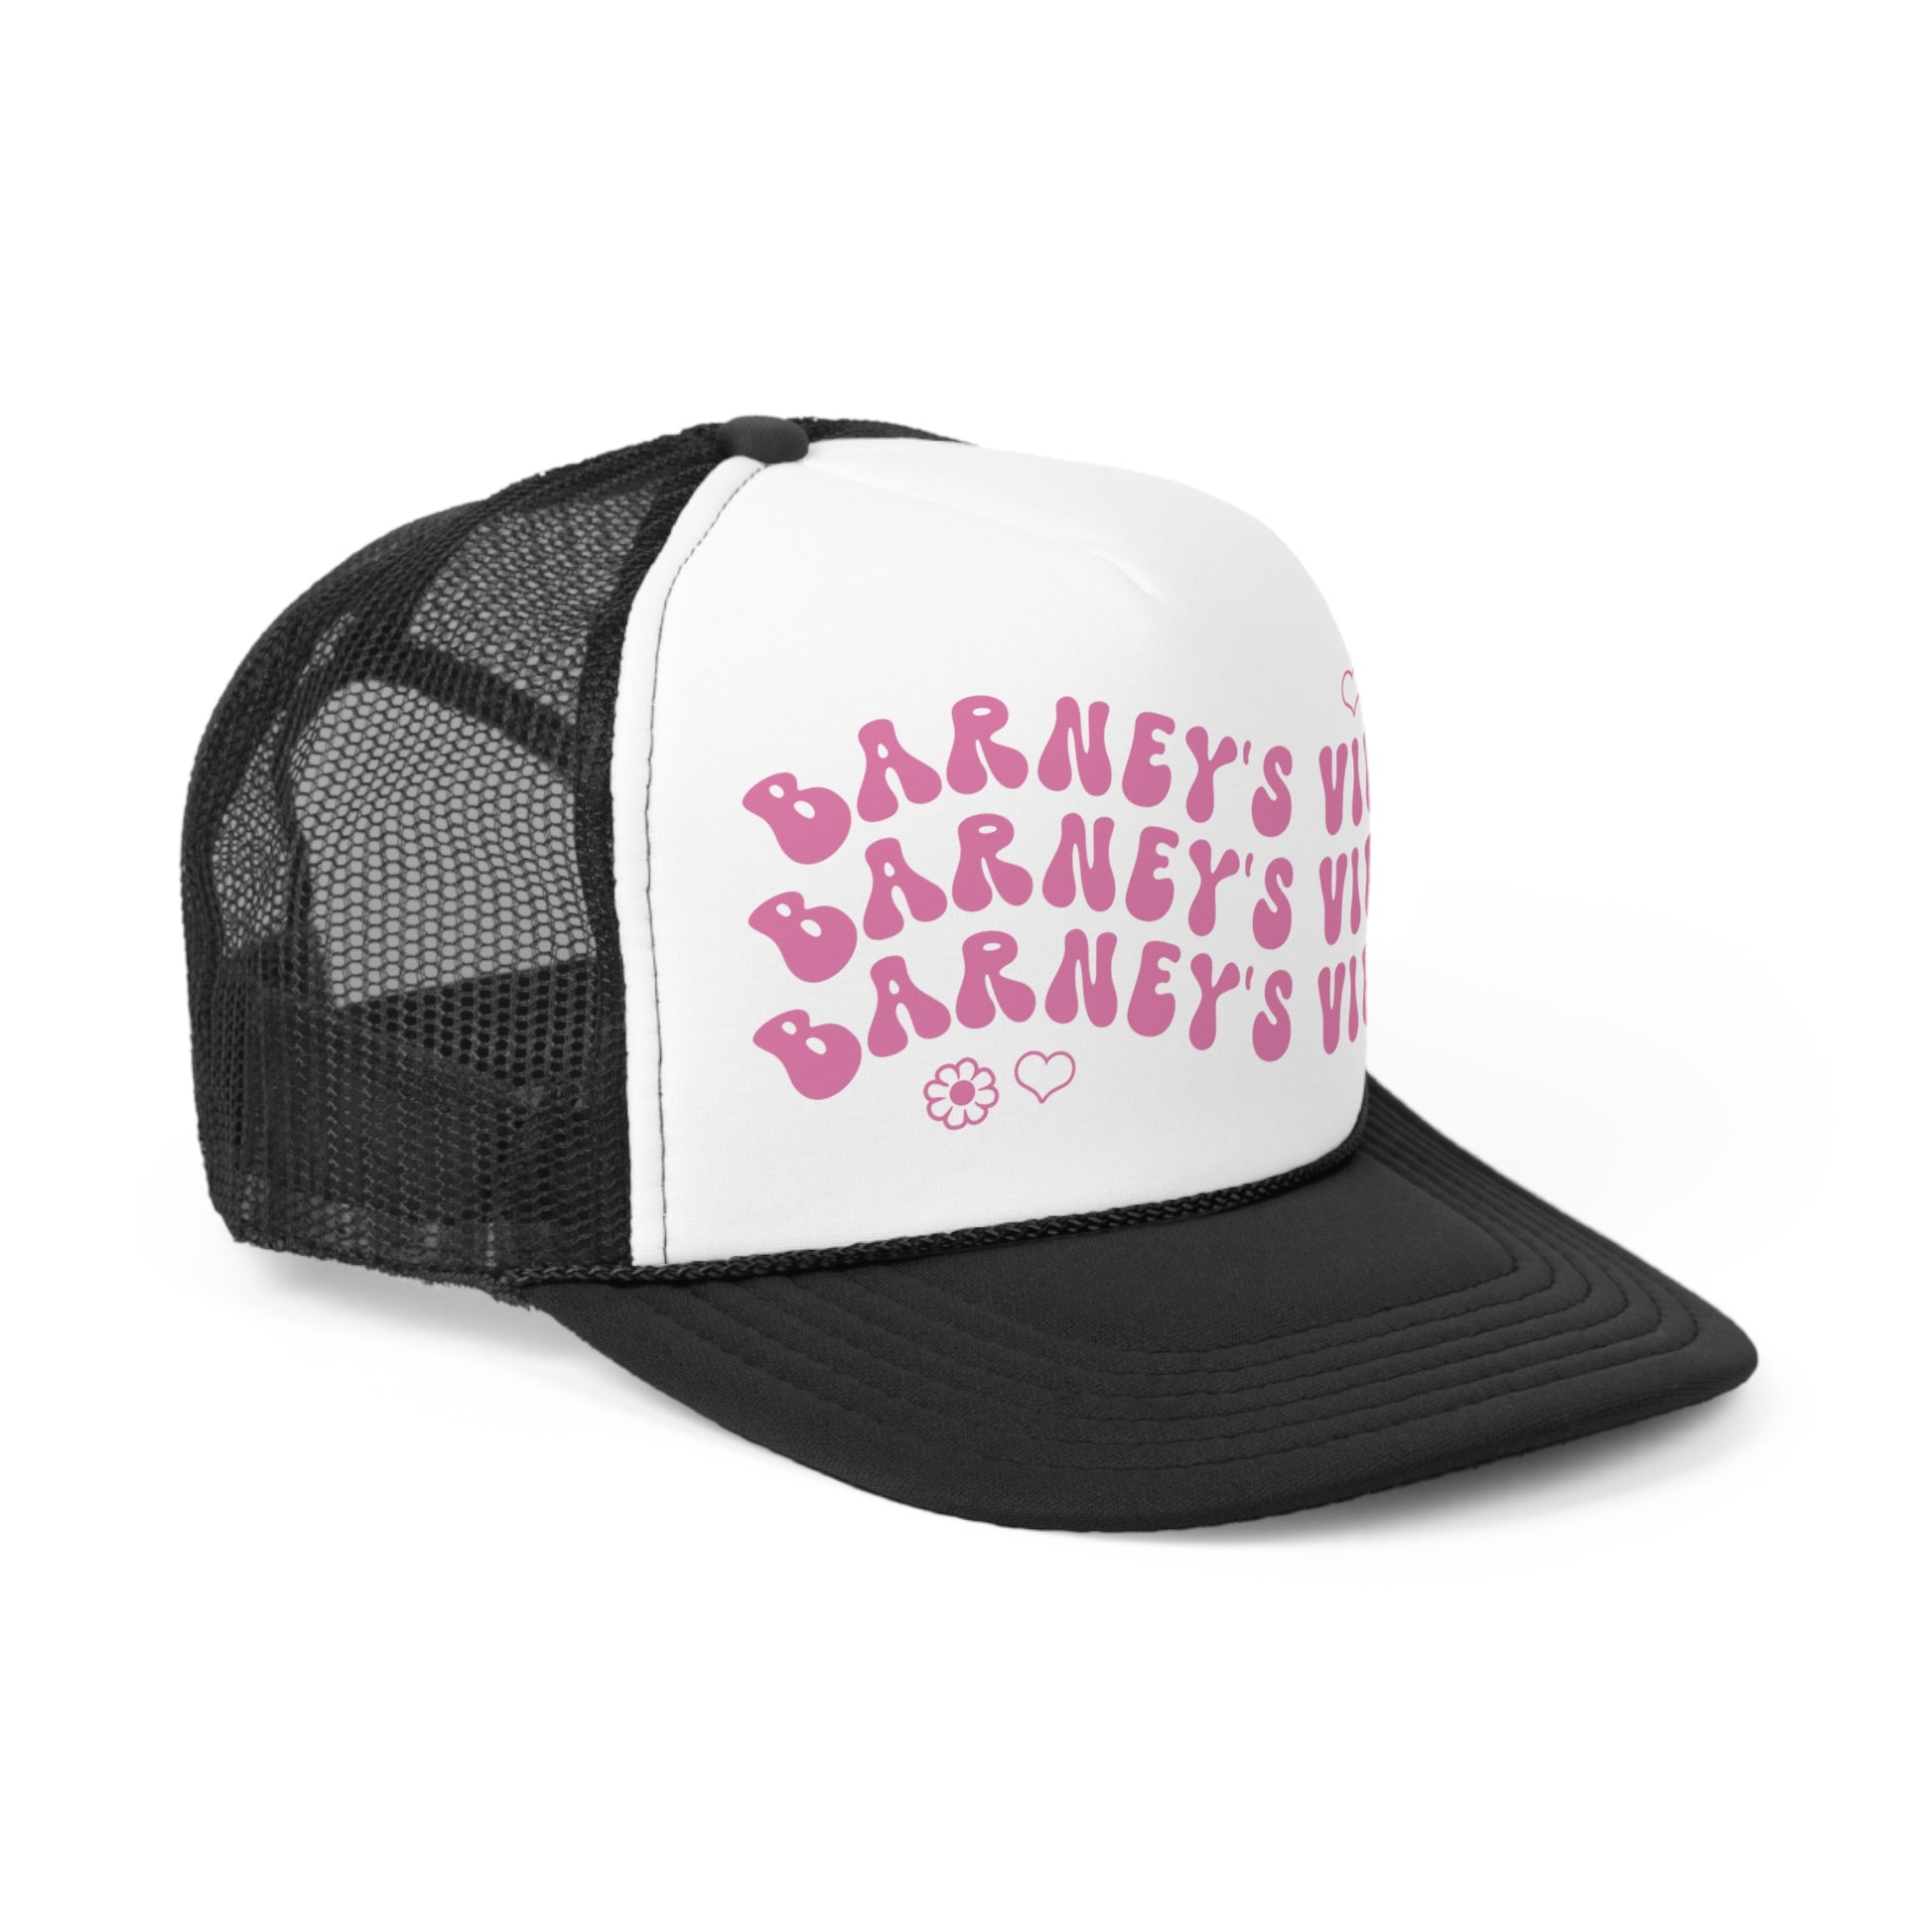 Barney's Vibes | BARNEY'S BEANERY - Trucker Hat | Berry Graphic On Black And White Trucker Hat, Front Right View